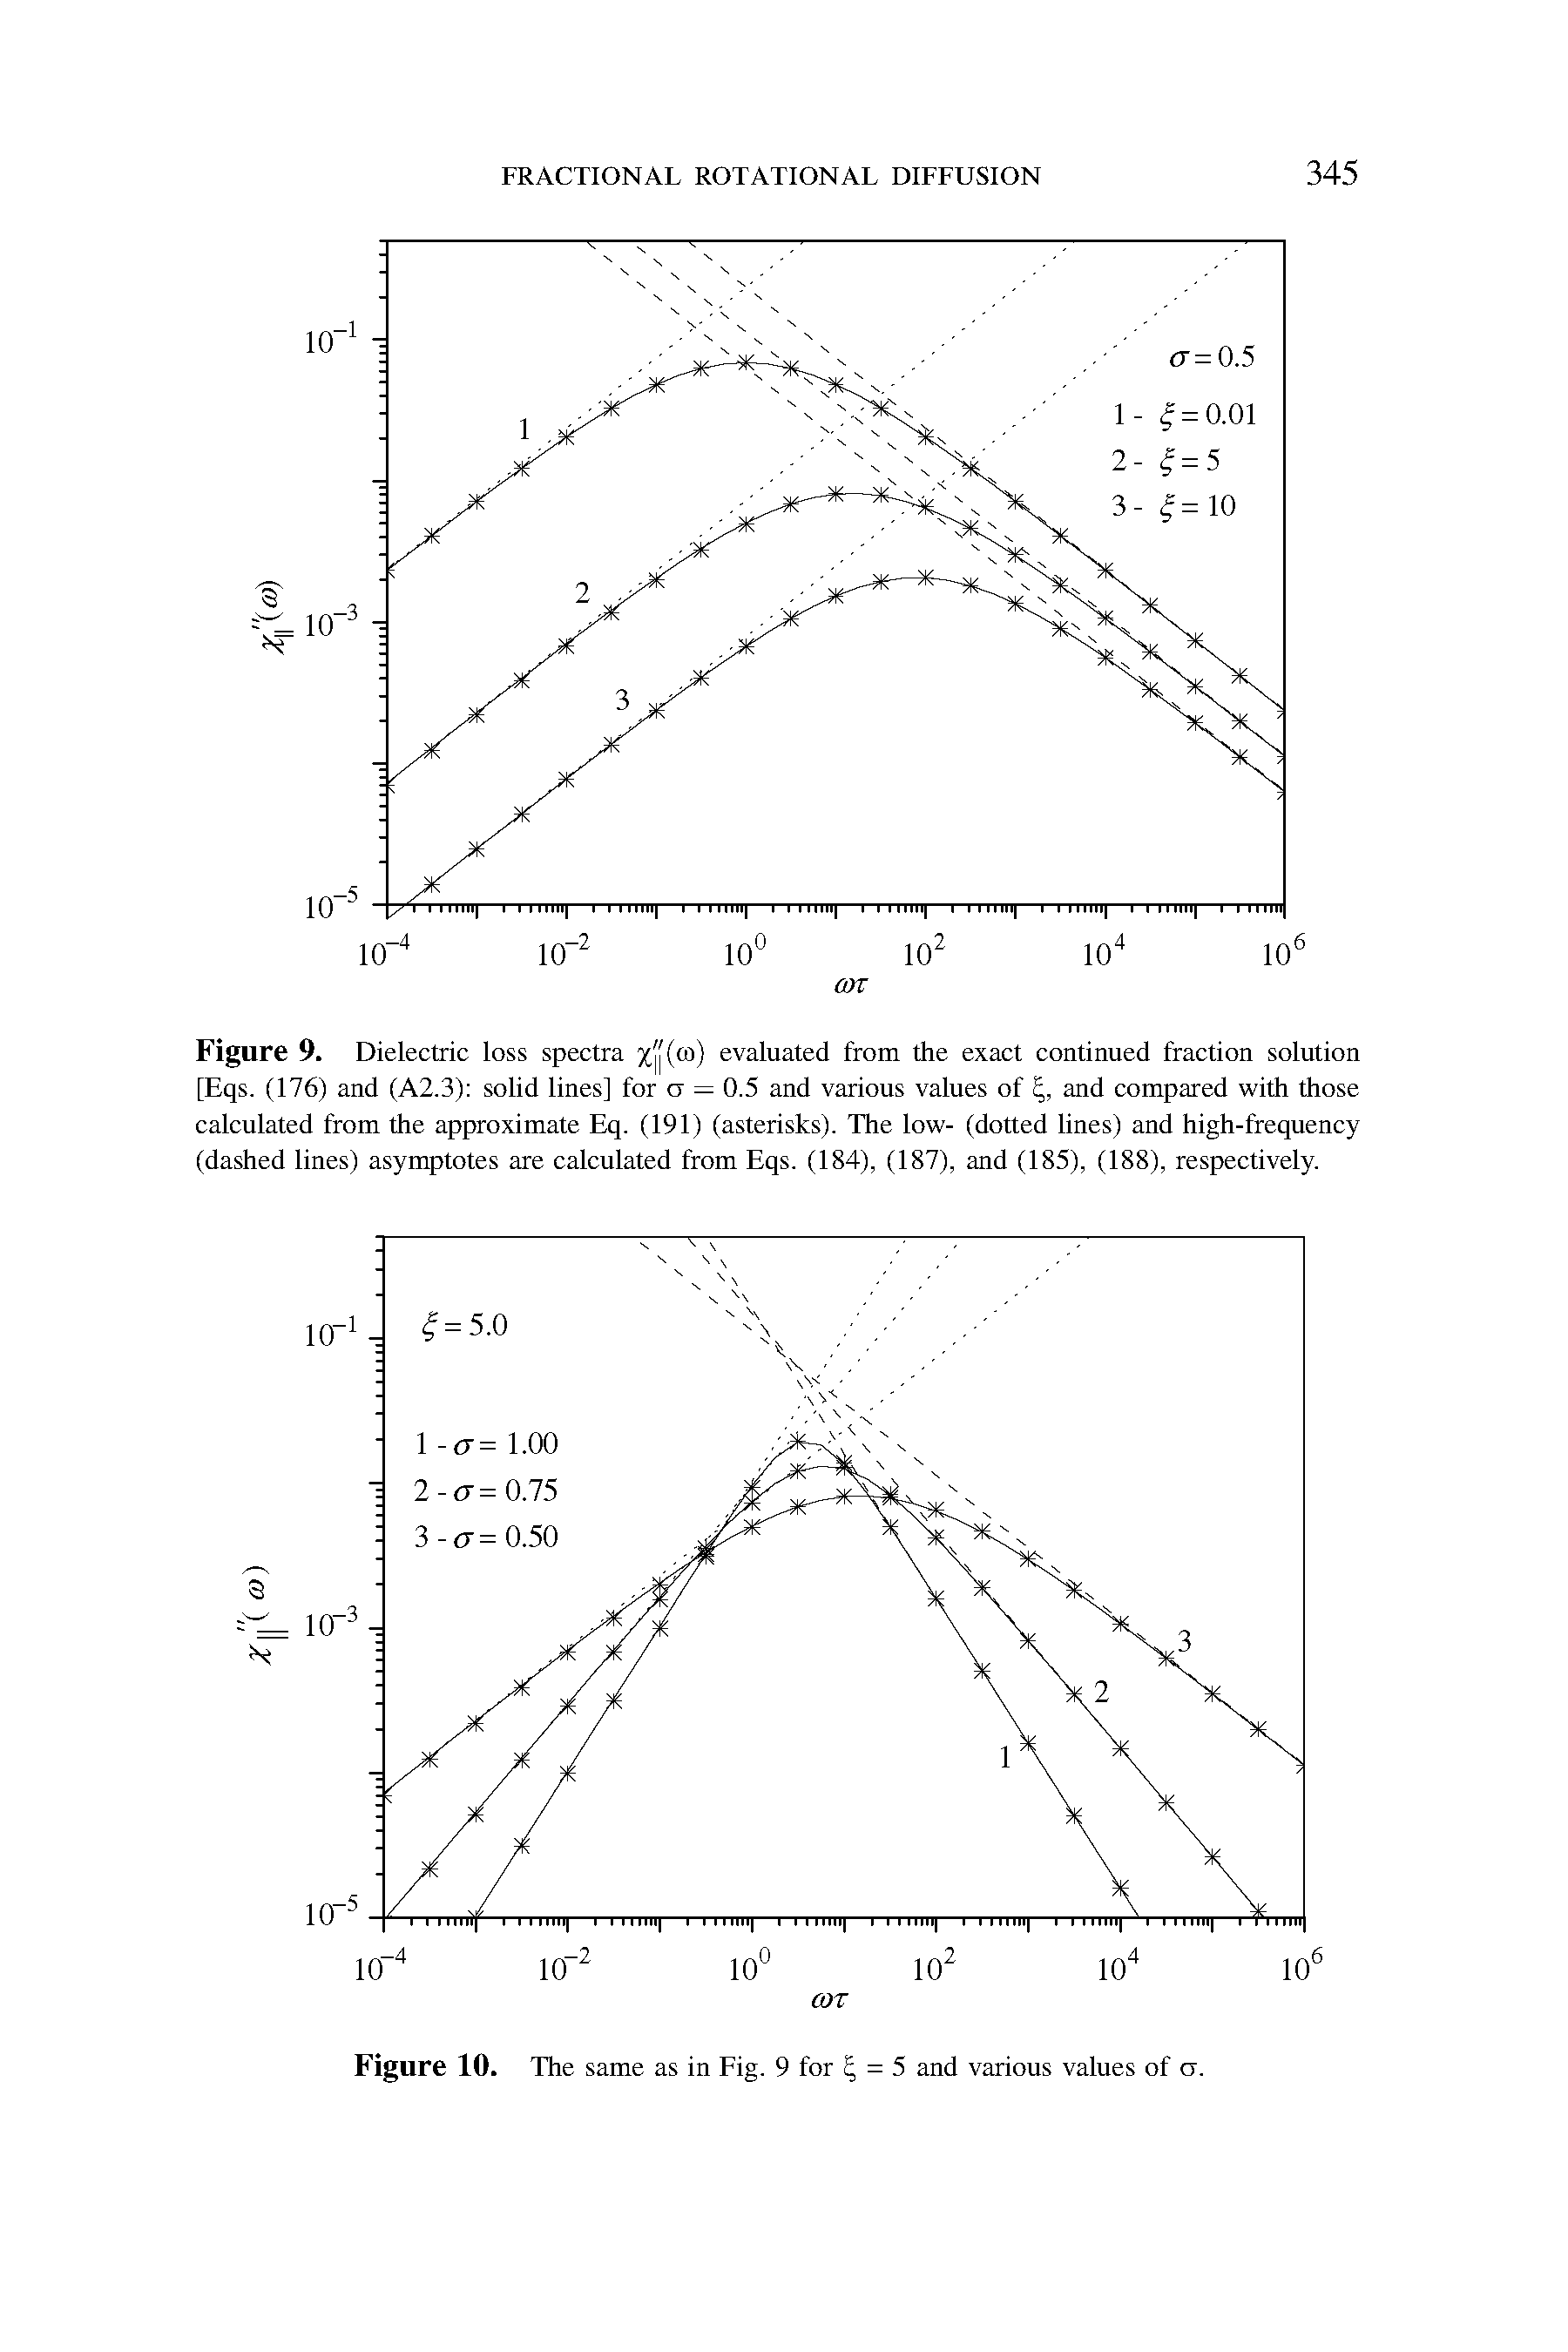 Figure 9. Dielectric loss spectra %jj(to) evaluated from the exact continued fraction solution [Eqs. (176) and (A2.3) solid lines] for a = 0.5 and various values of , and compared with those calculated from the approximate Eq. (191) (asterisks). The low- (dotted lines) and high-frequency (dashed lines) asymptotes are calculated from Eqs. (184), (187), and (185), (188), respectively.